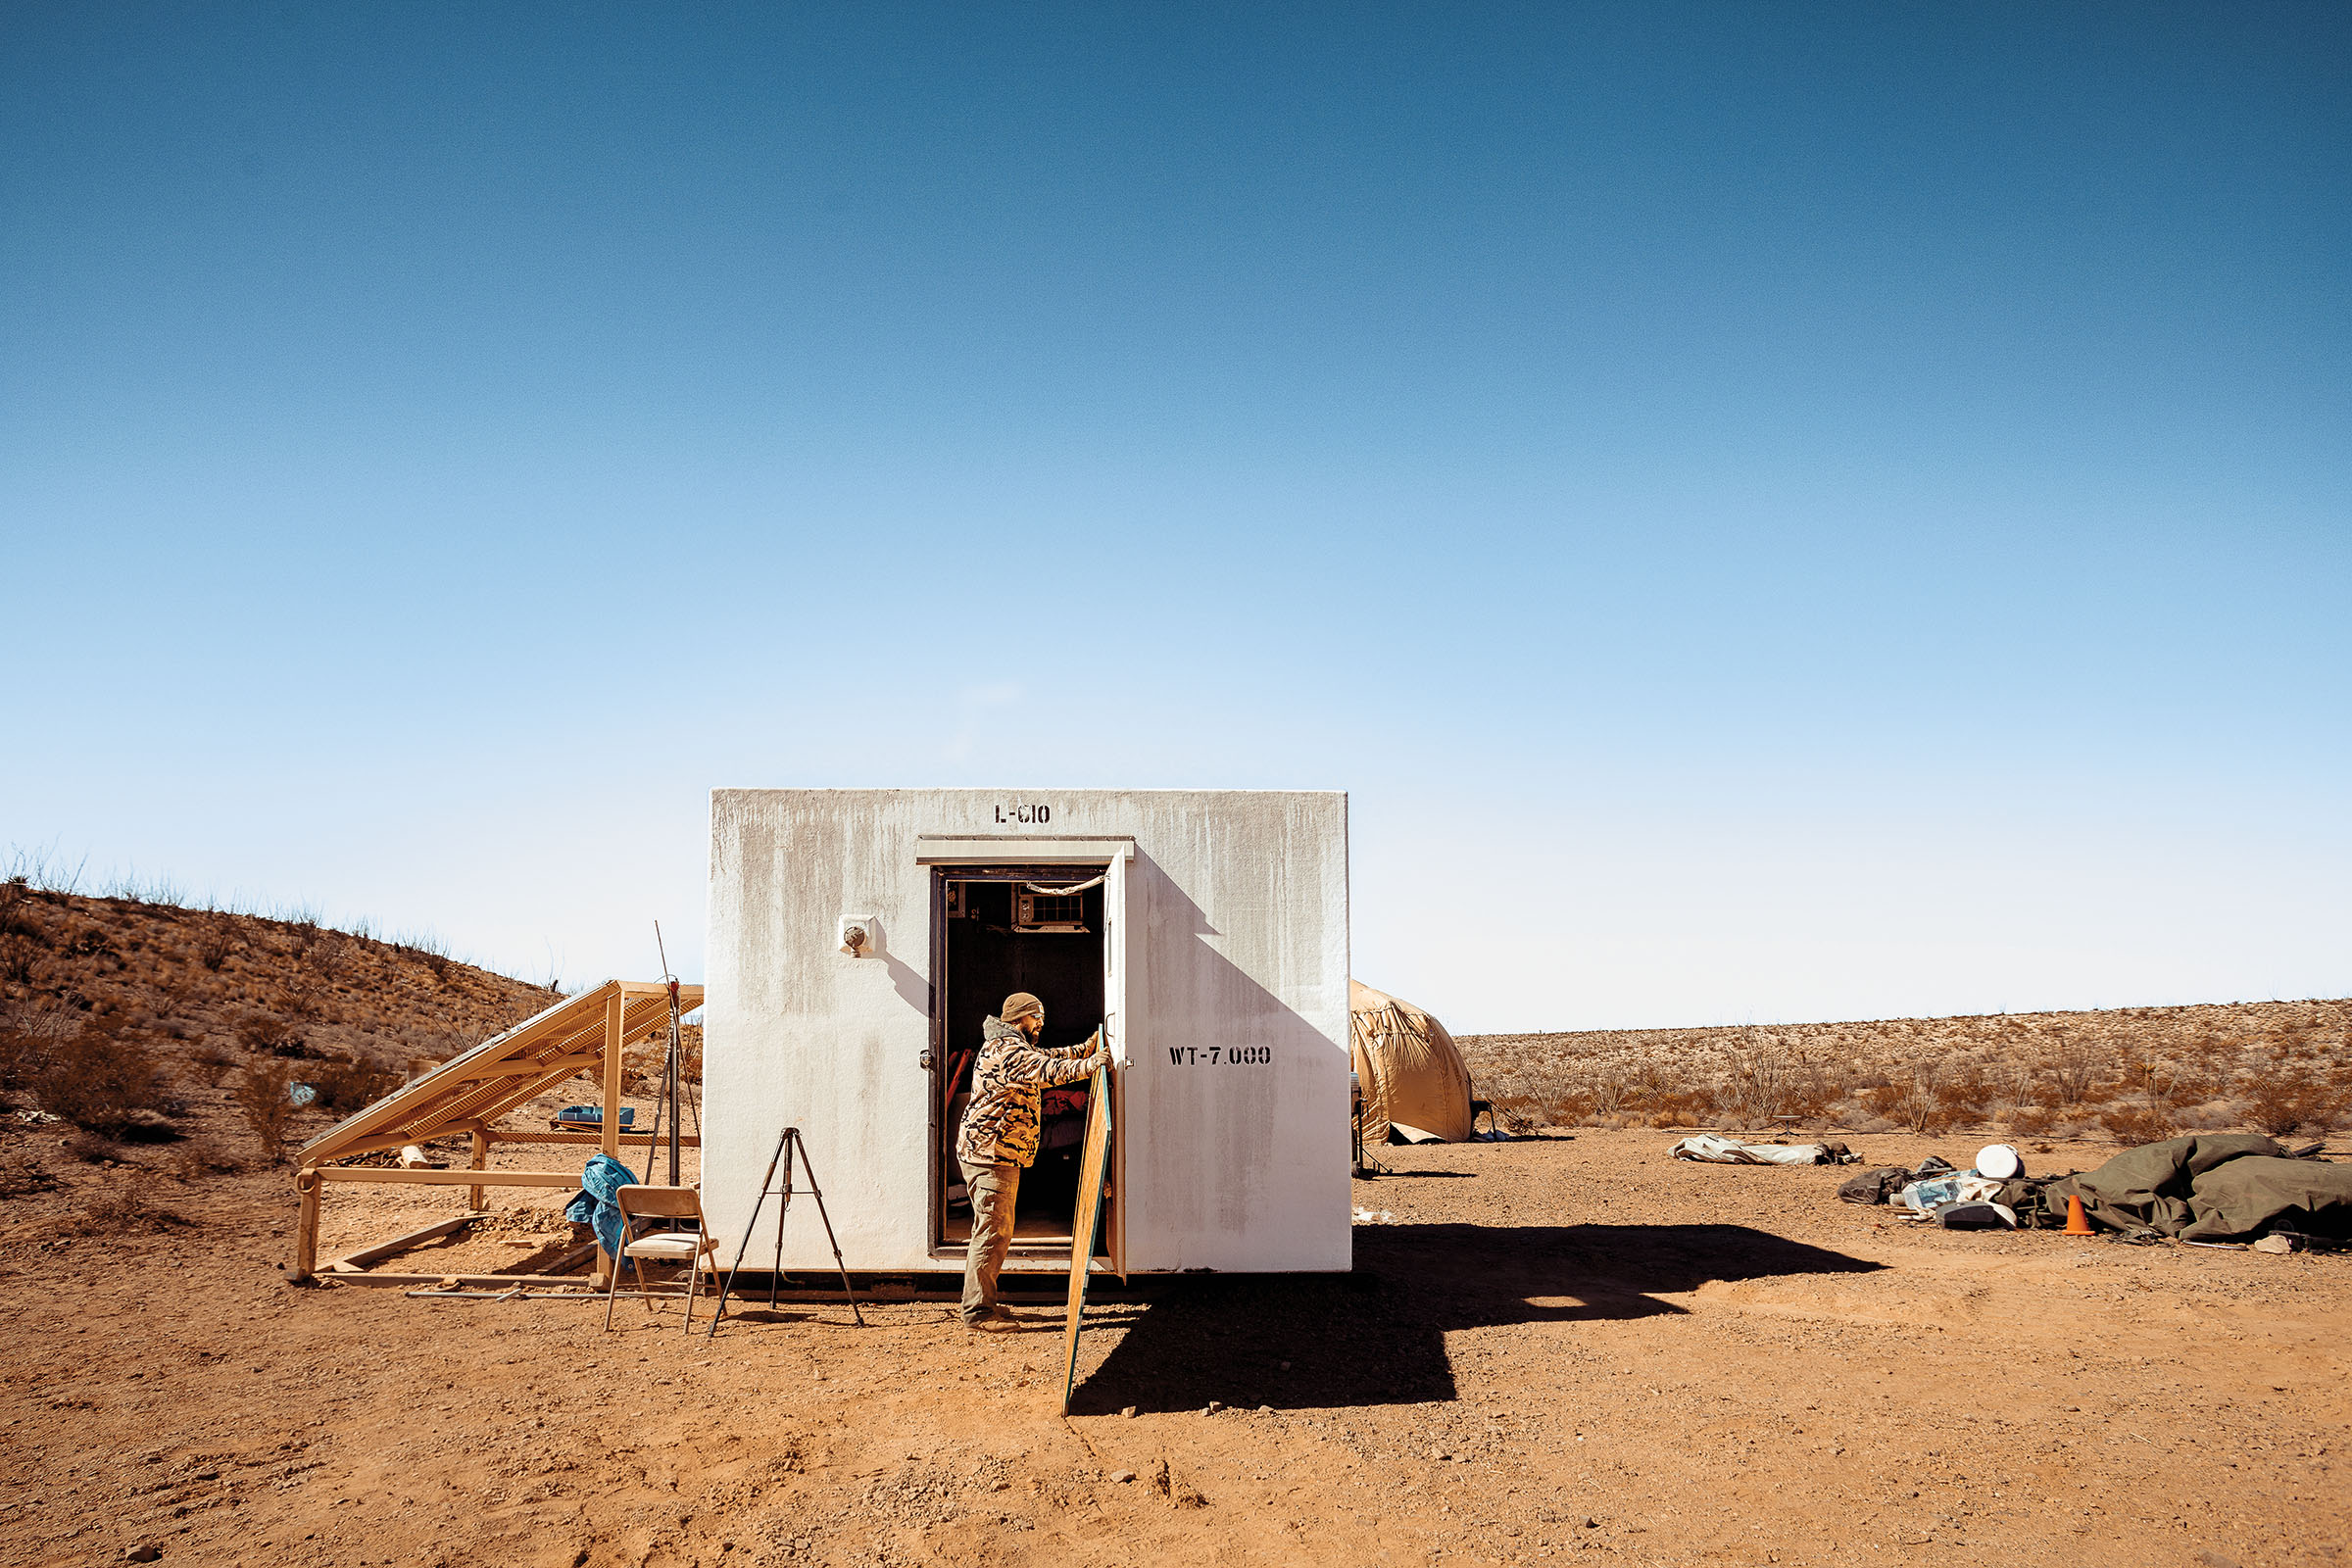 A man holds open the door of a small white structure in a desert landscape under blue sky